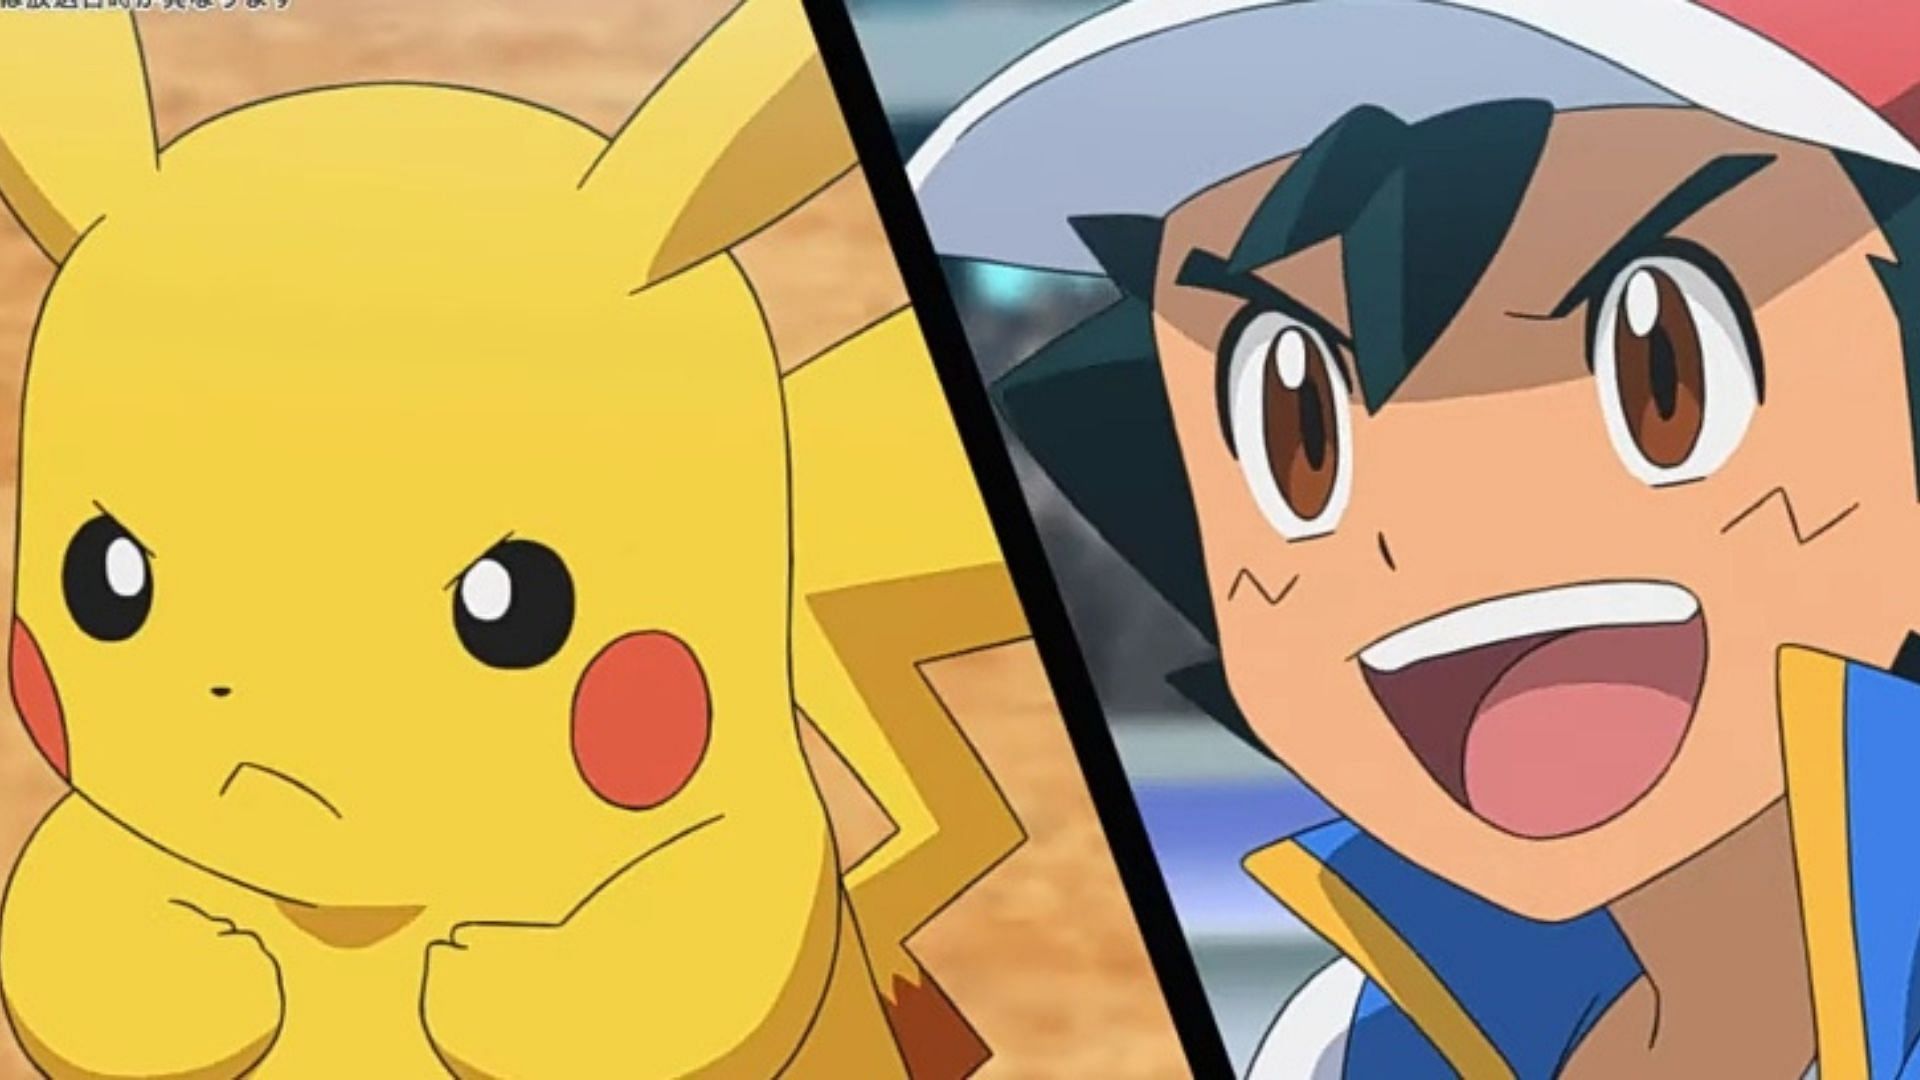 Pikachu and Ash as seen in the anime (Image via OLM)